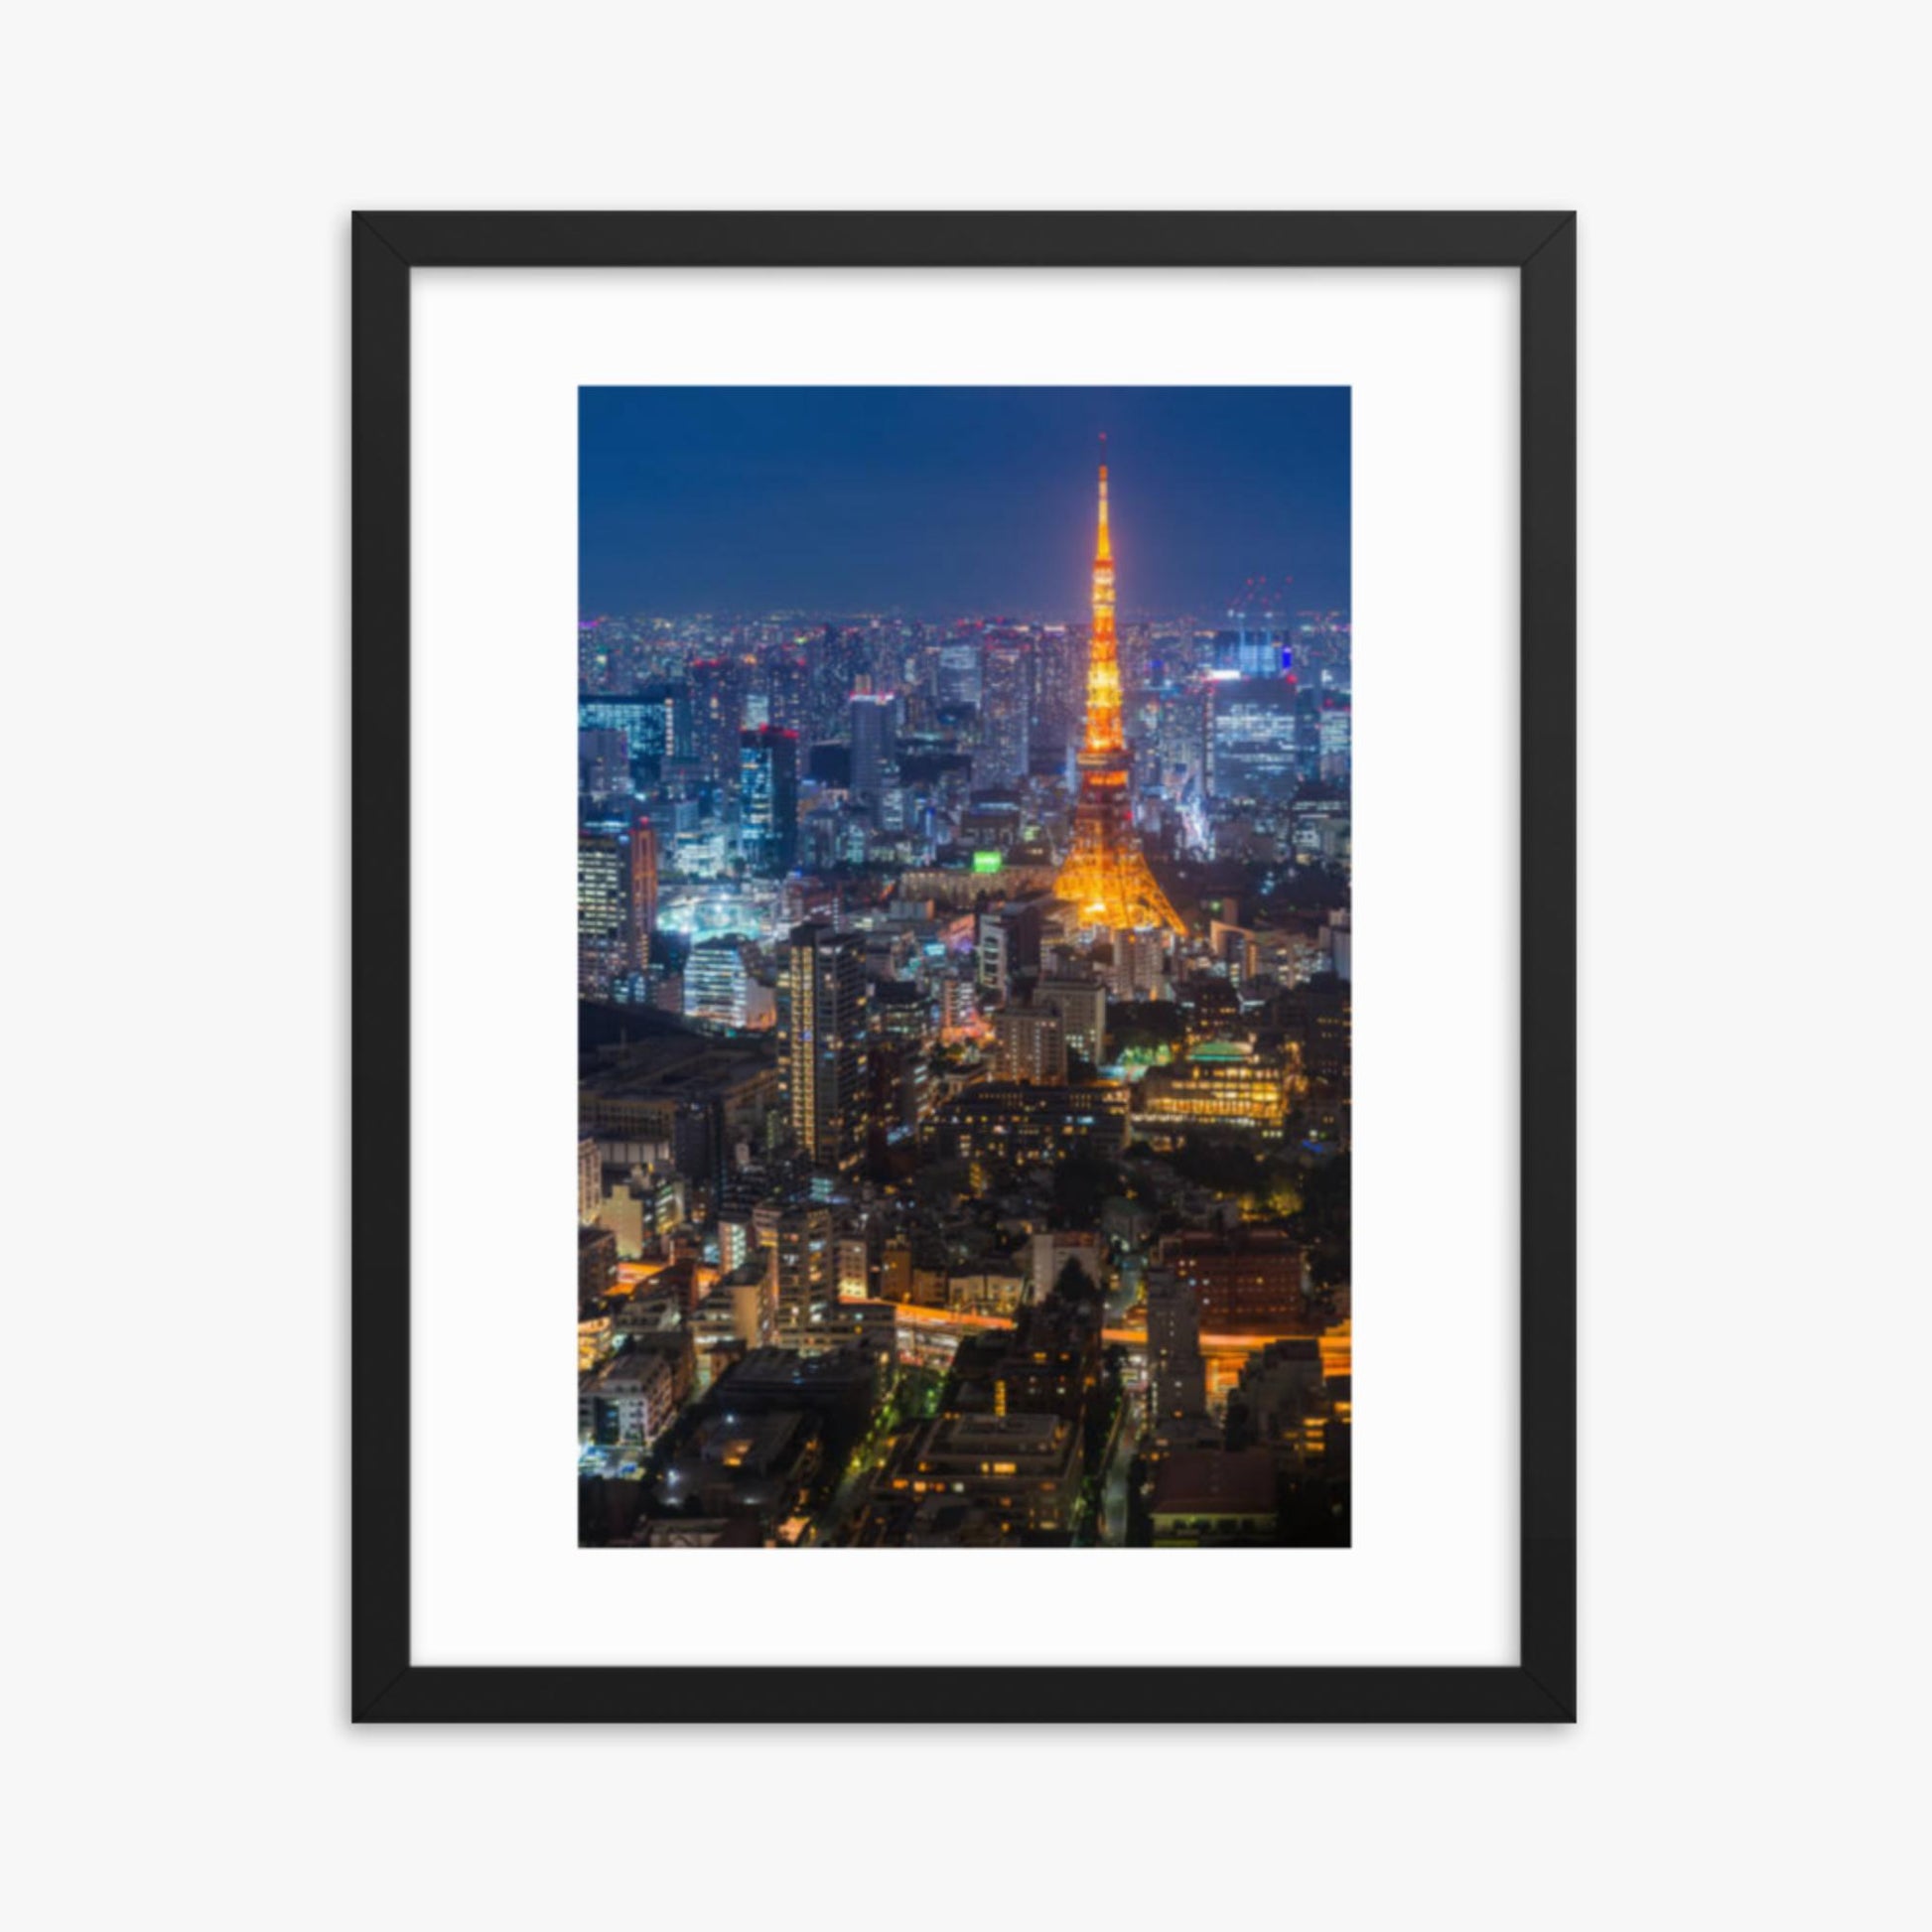 Tokyo Tower illuminated 16x20 in Poster With Black Frame